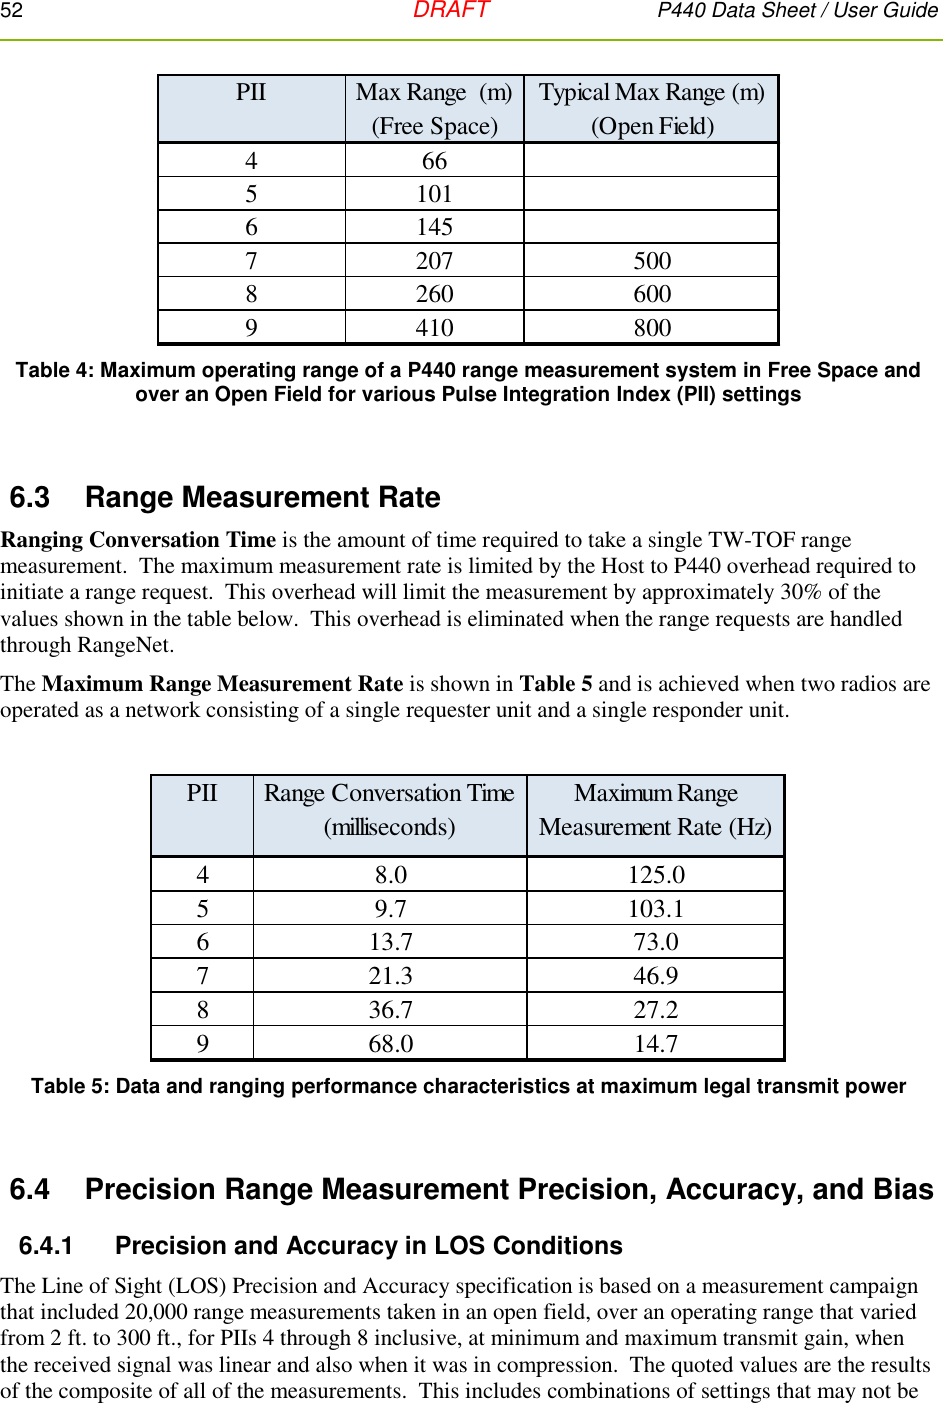 52   DRAFT P440 Data Sheet / User Guide    Table 4: Maximum operating range of a P440 range measurement system in Free Space and over an Open Field for various Pulse Integration Index (PII) settings  6.3  Range Measurement Rate Ranging Conversation Time is the amount of time required to take a single TW-TOF range measurement.  The maximum measurement rate is limited by the Host to P440 overhead required to initiate a range request.  This overhead will limit the measurement by approximately 30% of the values shown in the table below.  This overhead is eliminated when the range requests are handled through RangeNet.   The Maximum Range Measurement Rate is shown in Table 5 and is achieved when two radios are operated as a network consisting of a single requester unit and a single responder unit.   Table 5: Data and ranging performance characteristics at maximum legal transmit power  6.4  Precision Range Measurement Precision, Accuracy, and Bias 6.4.1     Precision and Accuracy in LOS Conditions   The Line of Sight (LOS) Precision and Accuracy specification is based on a measurement campaign that included 20,000 range measurements taken in an open field, over an operating range that varied from 2 ft. to 300 ft., for PIIs 4 through 8 inclusive, at minimum and maximum transmit gain, when the received signal was linear and also when it was in compression.  The quoted values are the results of the composite of all of the measurements.  This includes combinations of settings that may not be PIIMax Range  (m)      (Free Space)Typical Max Range (m)    (Open Field)466510161457207 5008260 6009410 800PIIRange Conversation Time (milliseconds)Maximum Range Measurement Rate (Hz)48.0 125.059.7 103.1613.7 73.0721.3 46.9836.7 27.2968.0 14.7